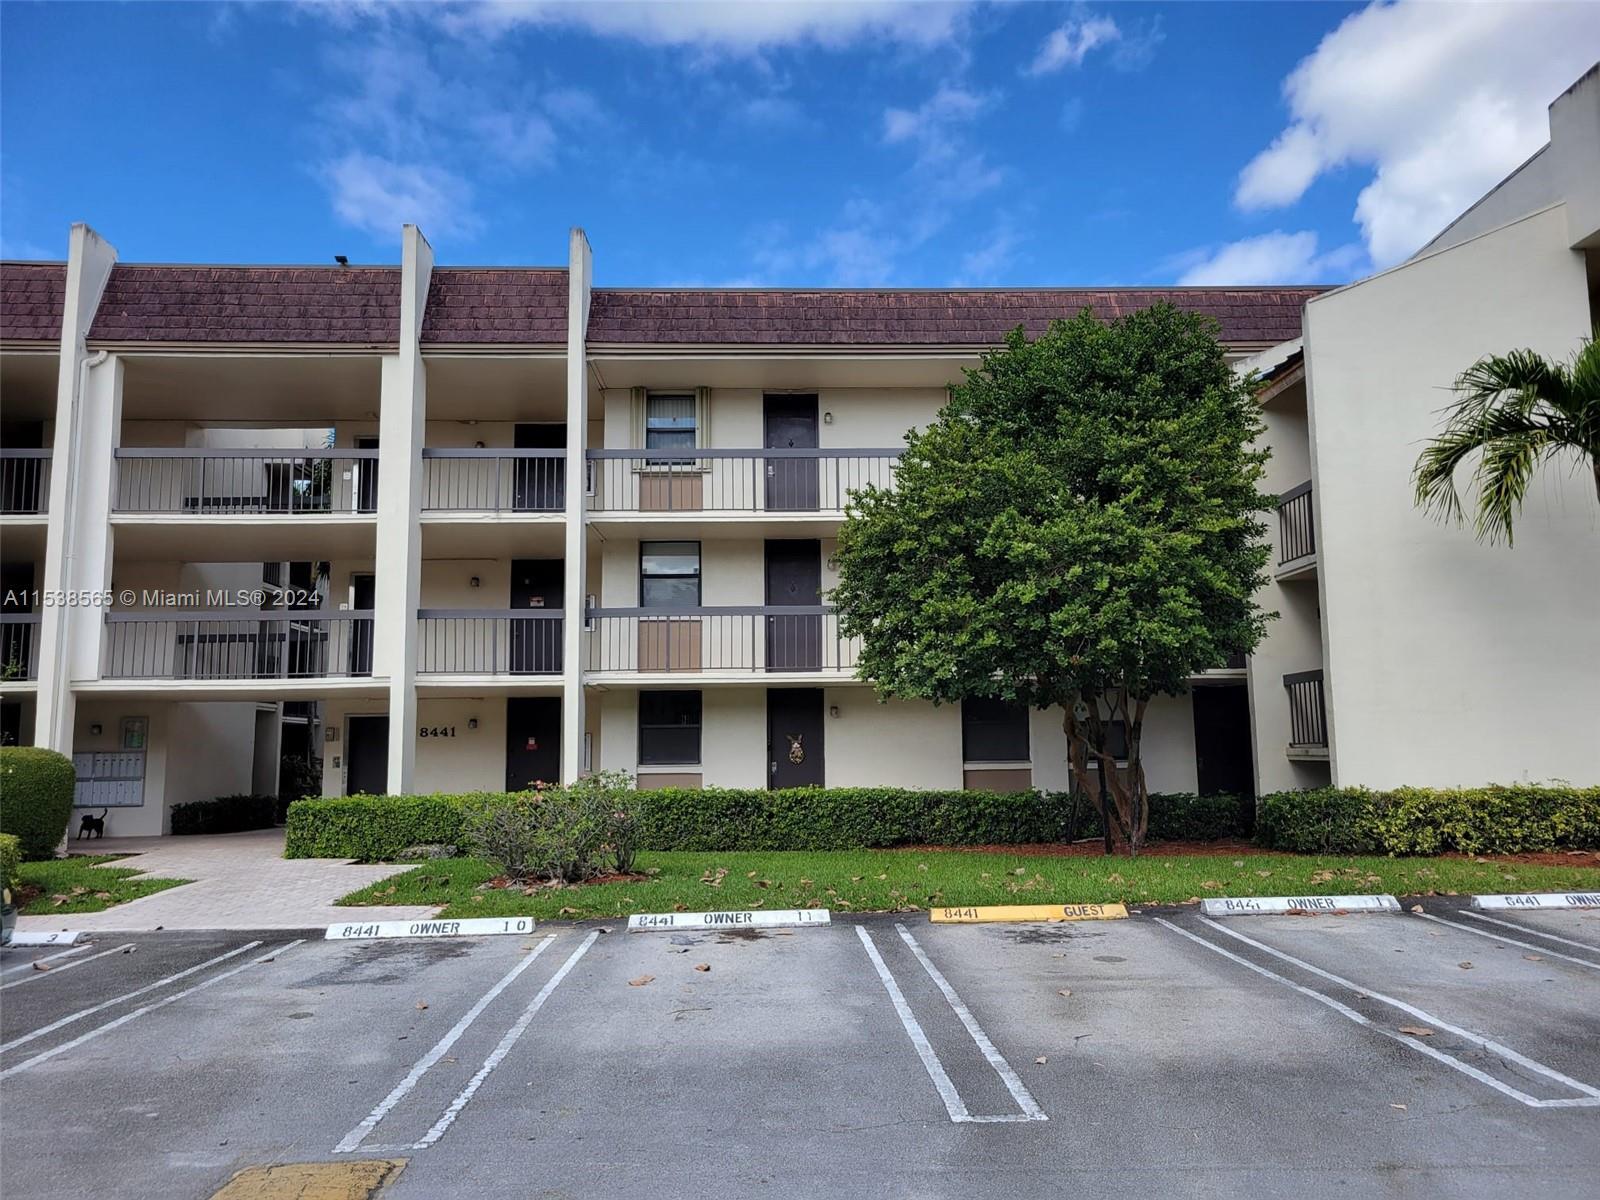 Photo of 8441 Forest Hills Dr #106 in Coral Springs, FL